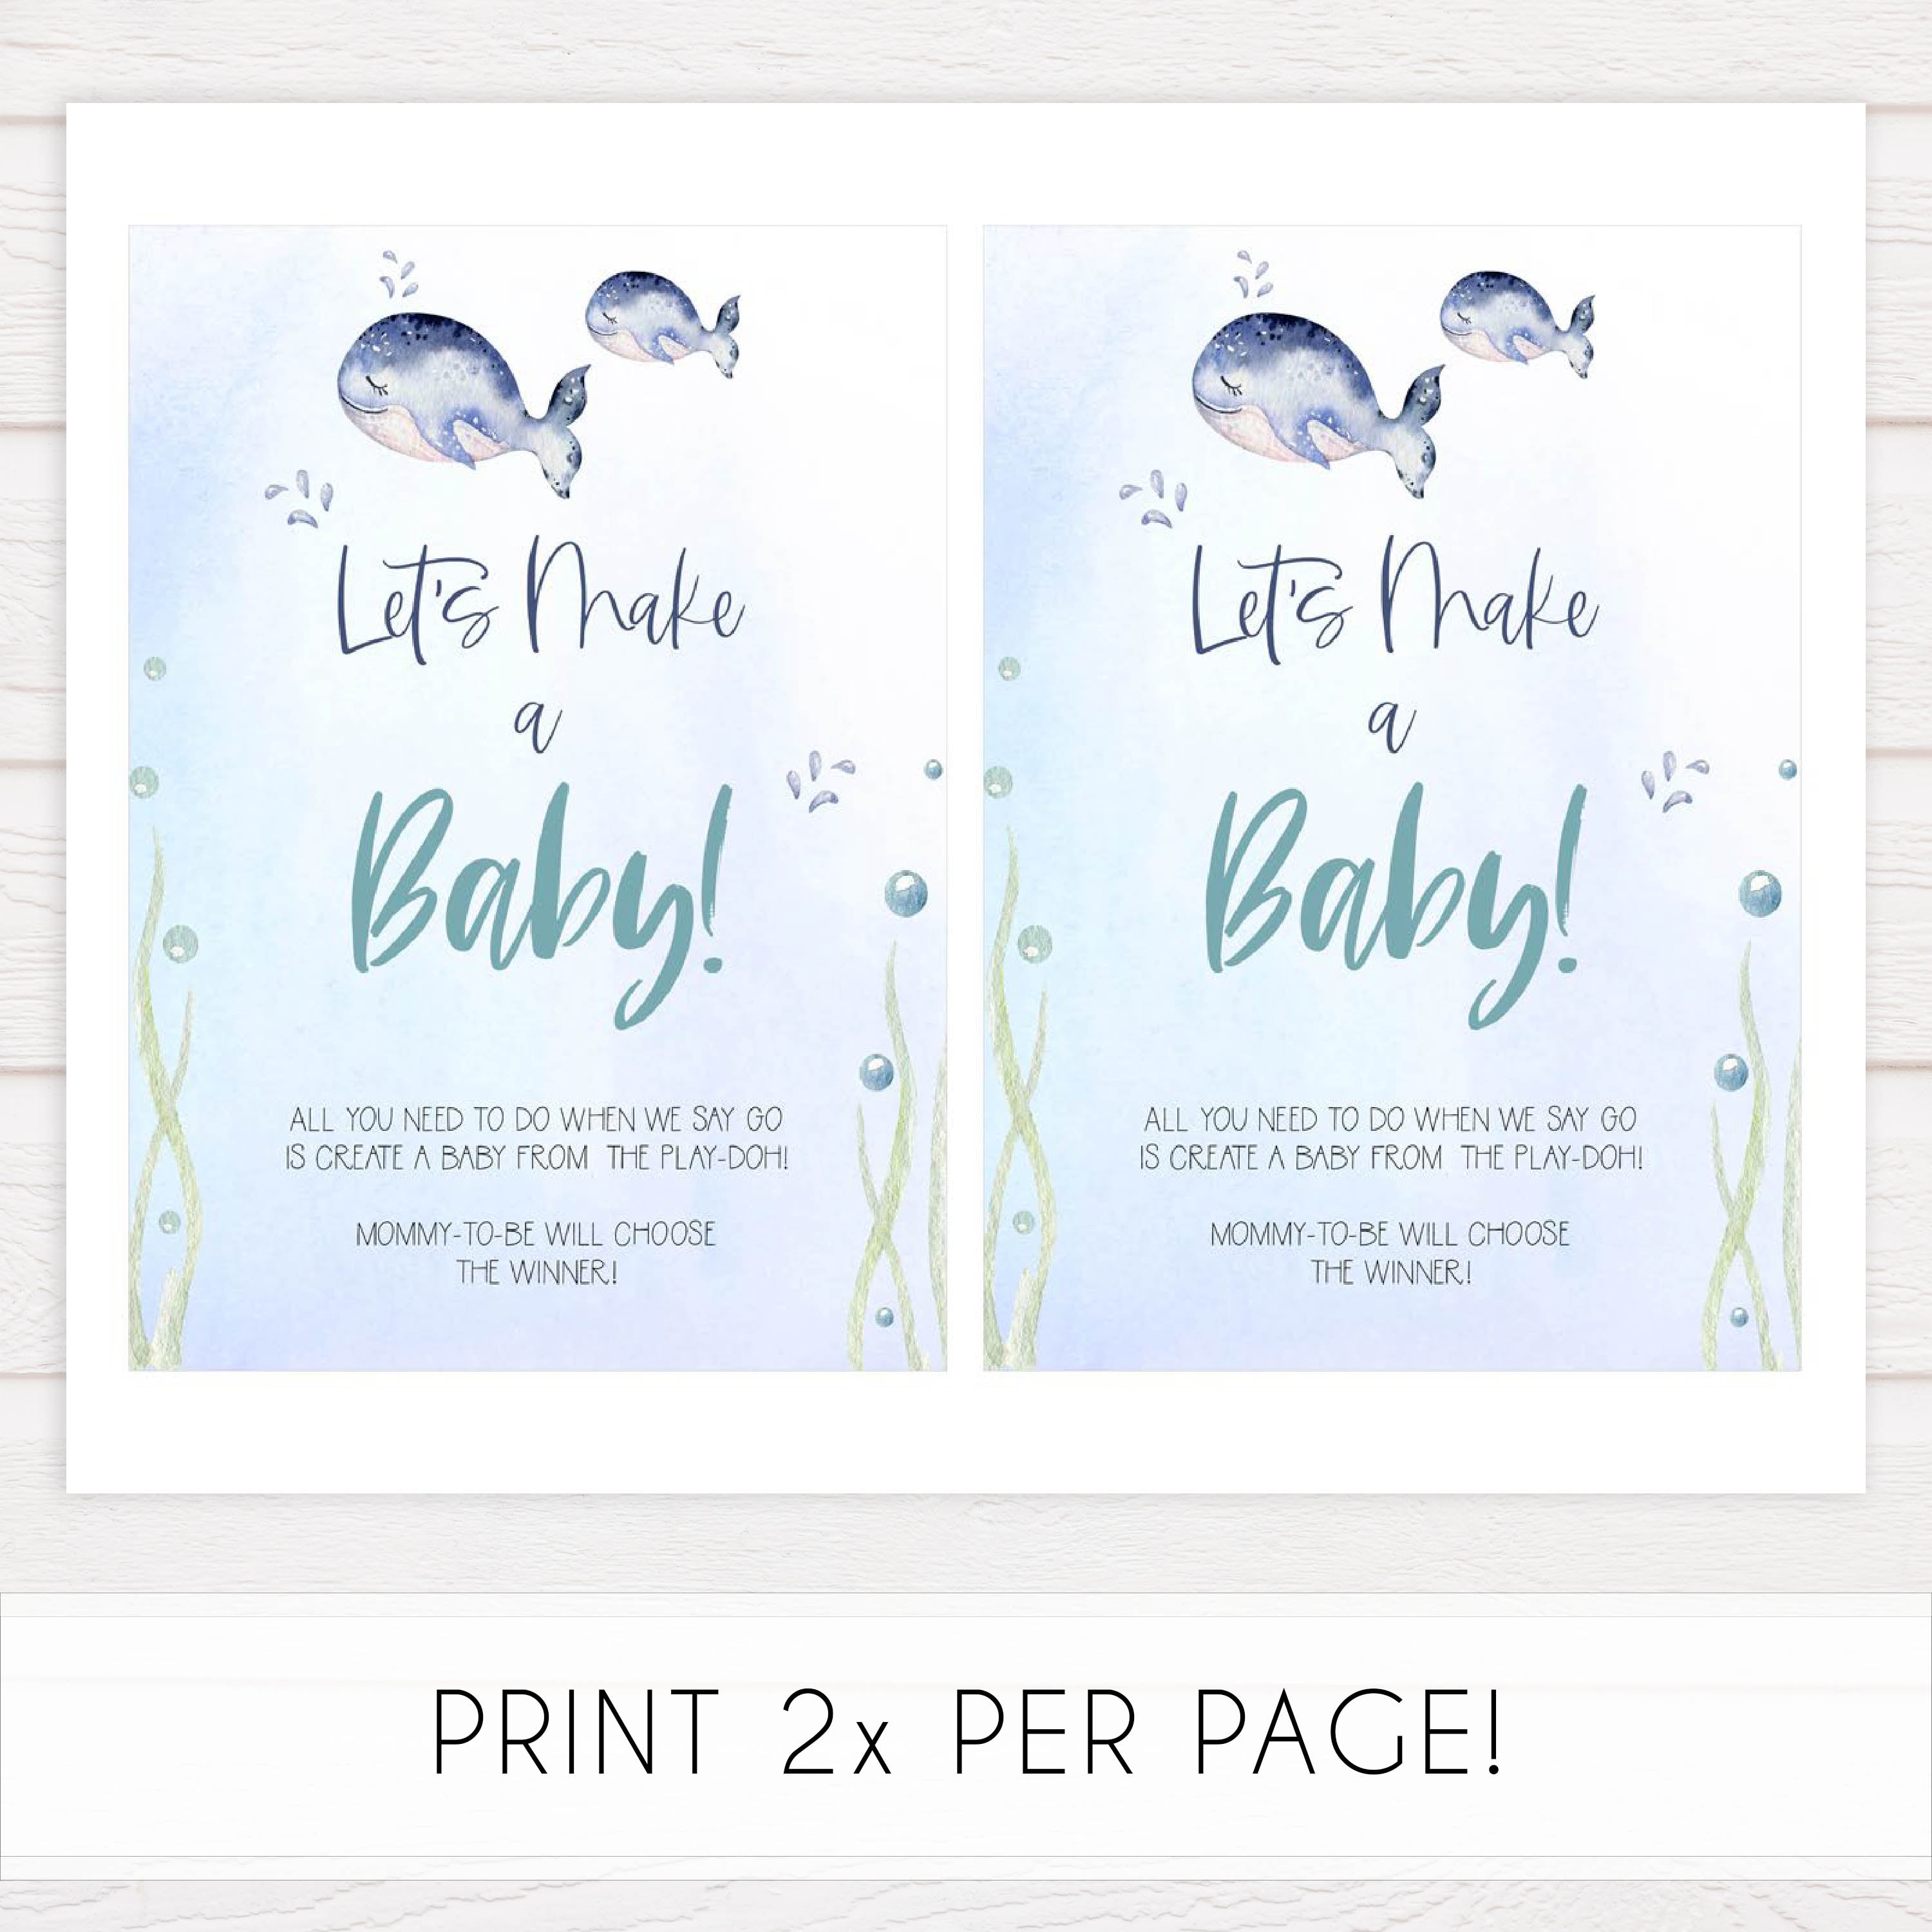 lets make a baby game, Printable baby shower games, whale baby games, baby shower games, fun baby shower ideas, top baby shower ideas, whale baby shower, baby shower games, fun whale baby shower ideas